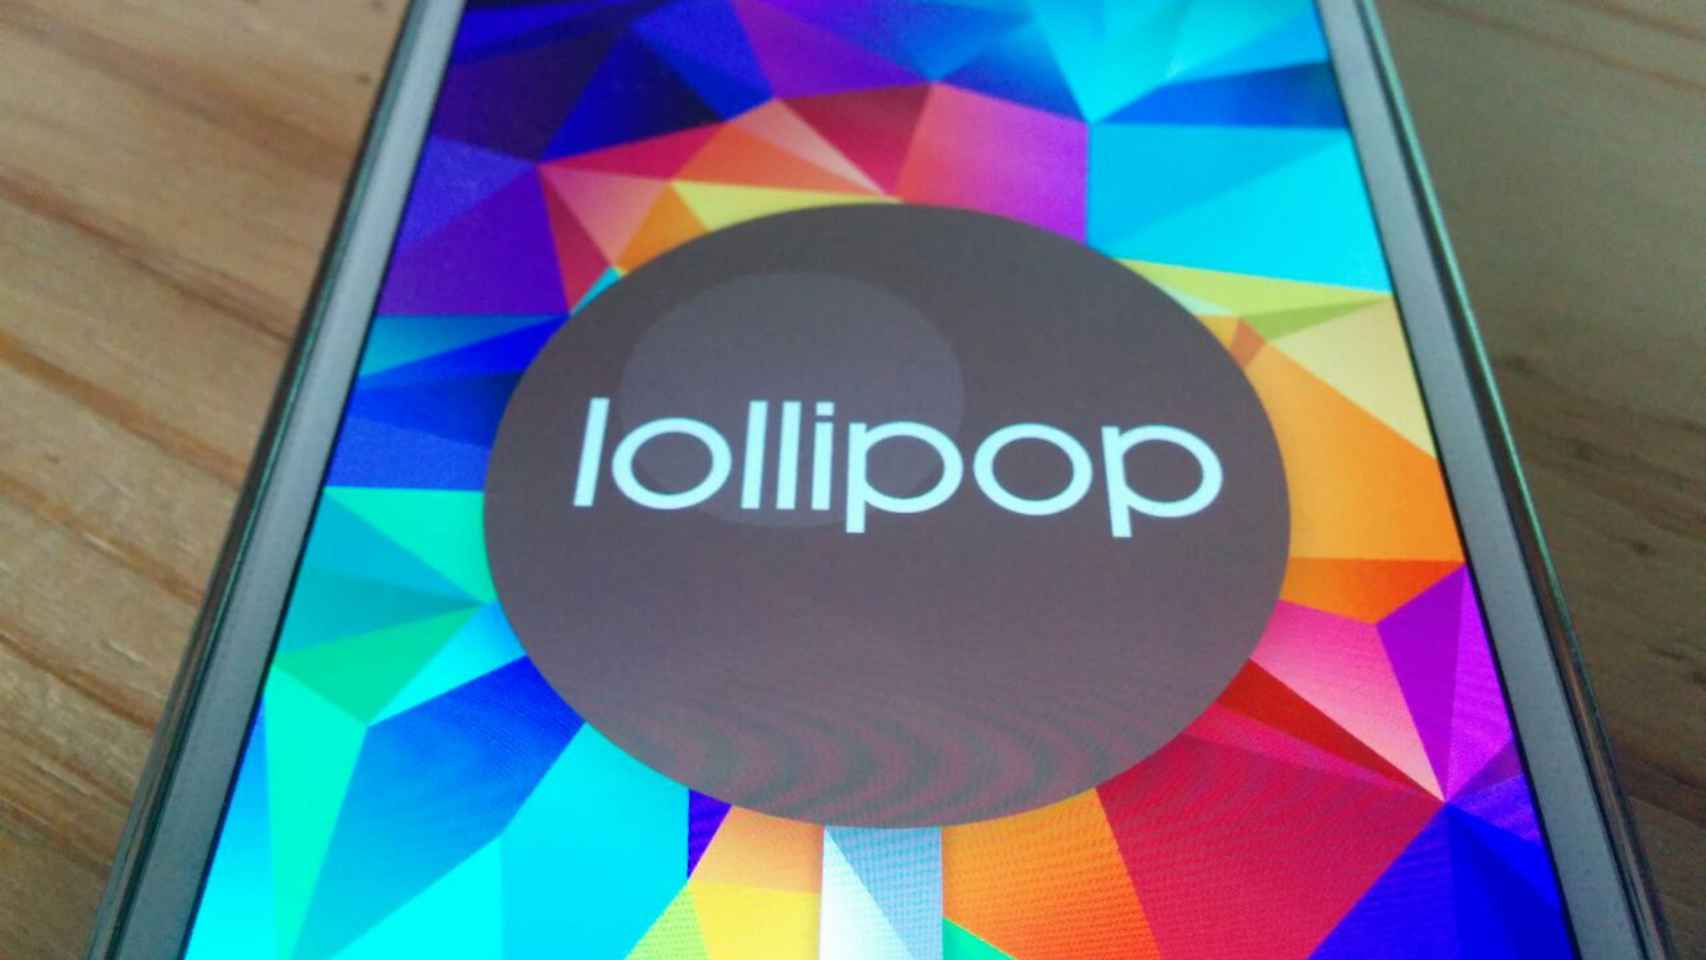 Samsung Galaxy S5 se actualiza a Android 5.0 Lollipop